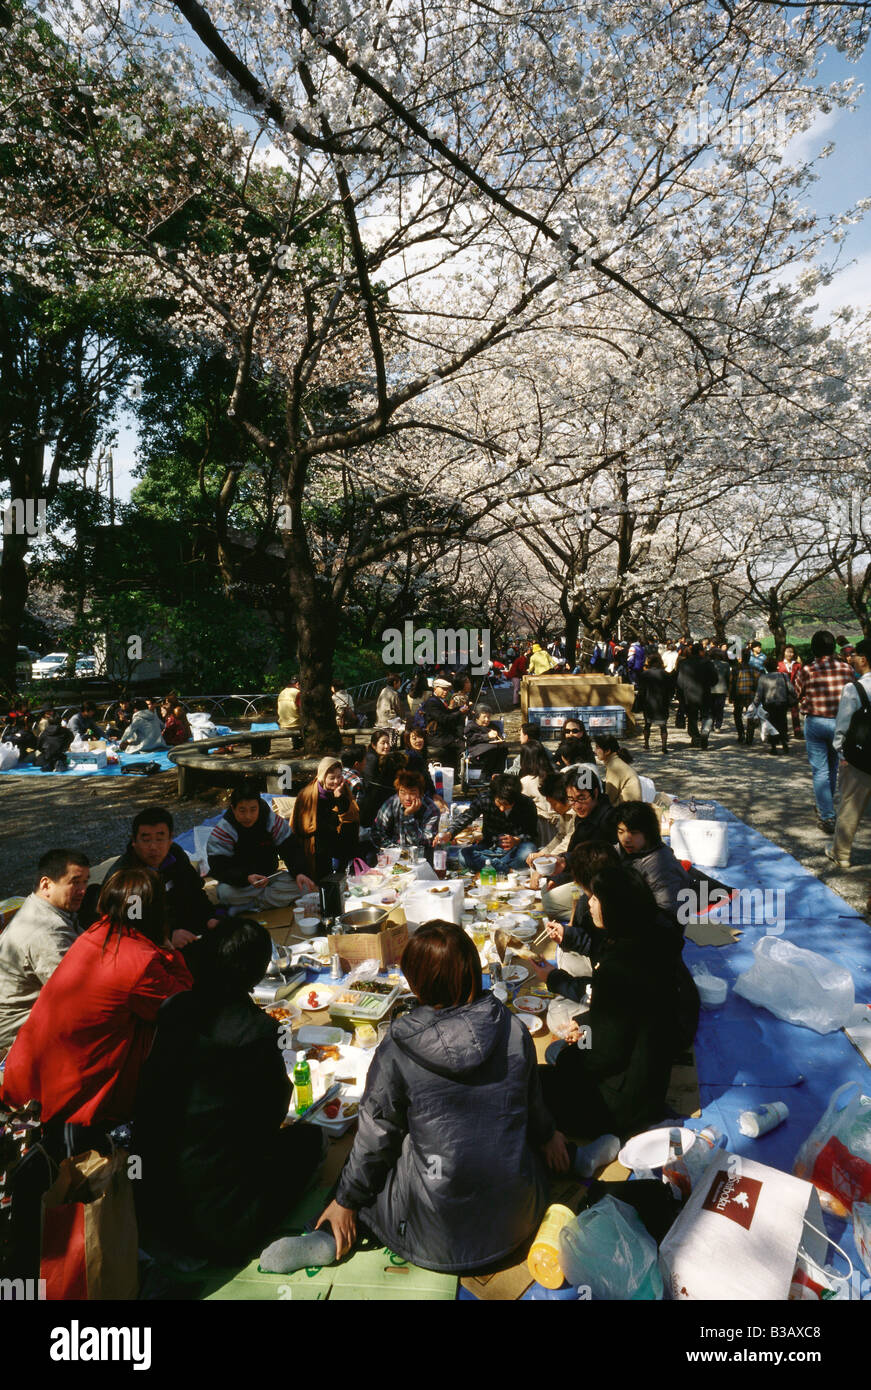 Tokyo Japan Hanami in Ueno Park locals turn out in great numbers to admire the springtime cherry blossom Stock Photo